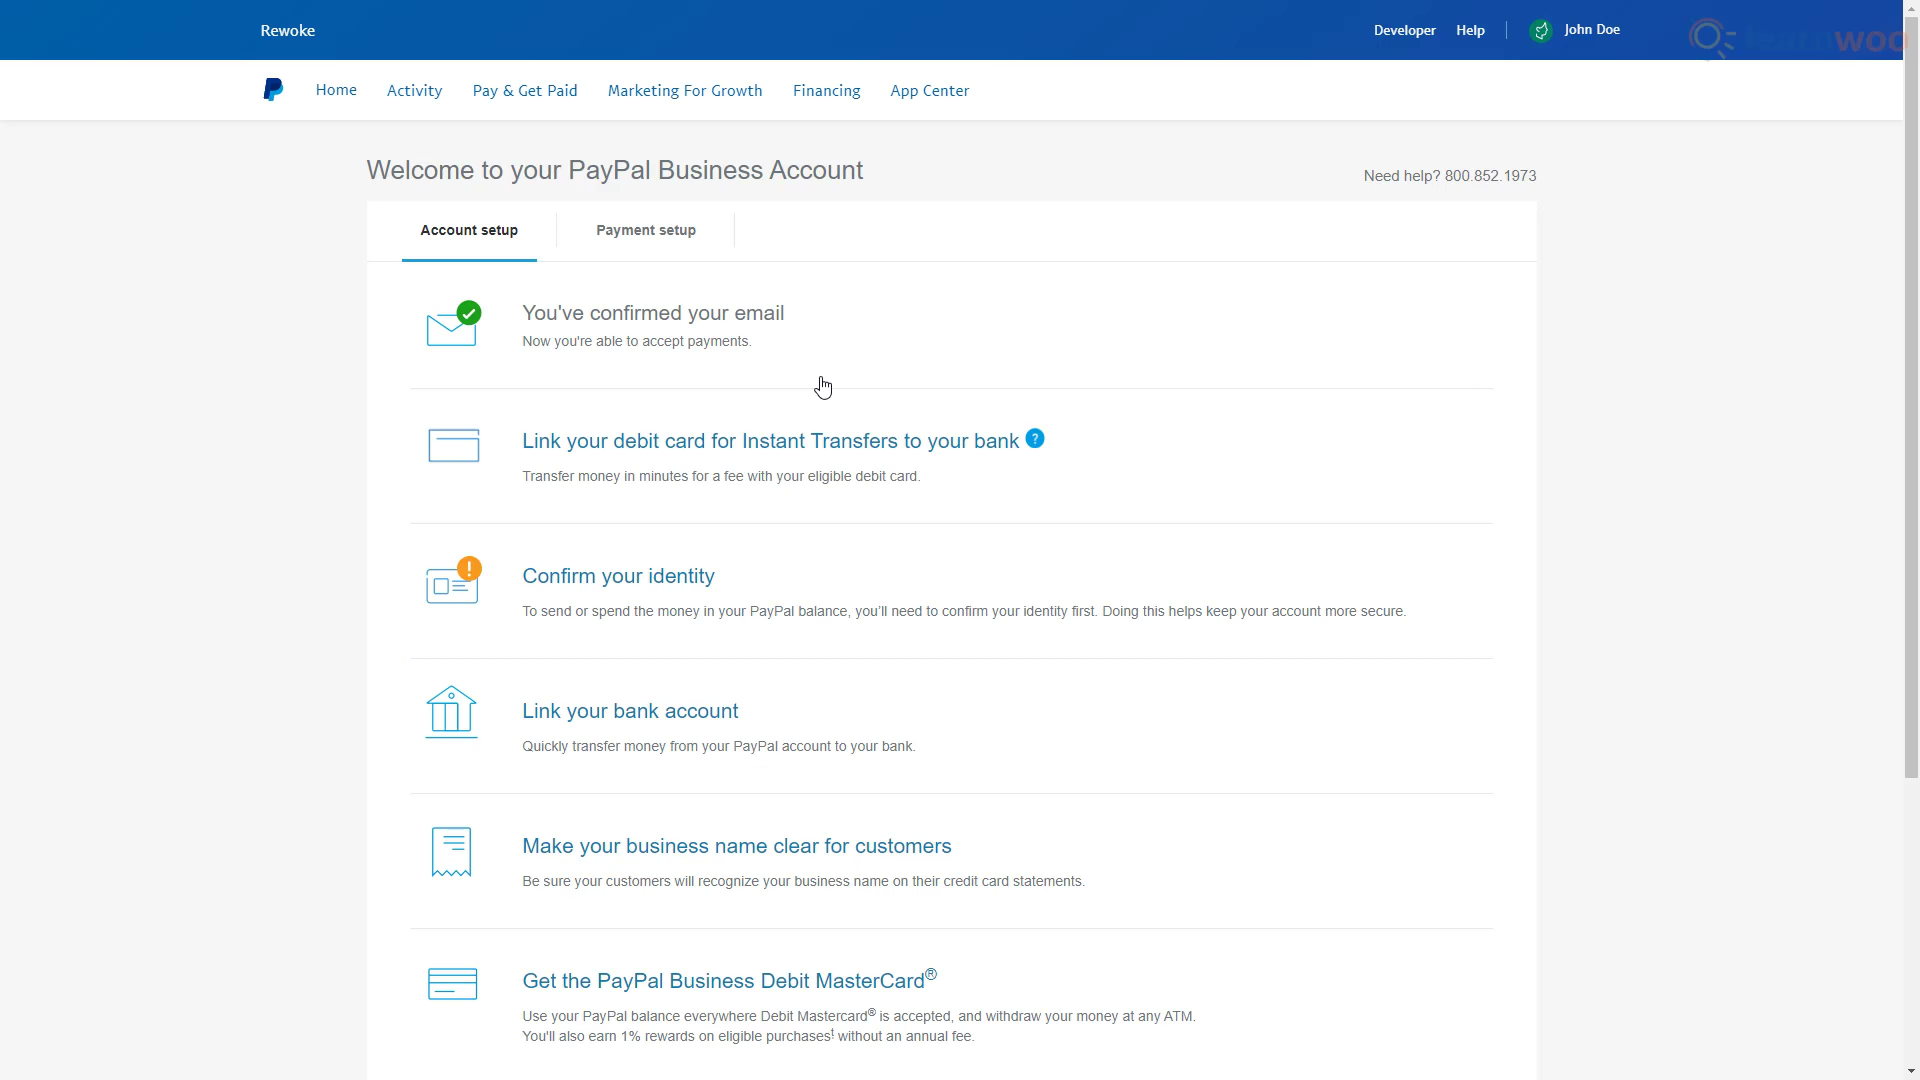 Paypal business account dashboard